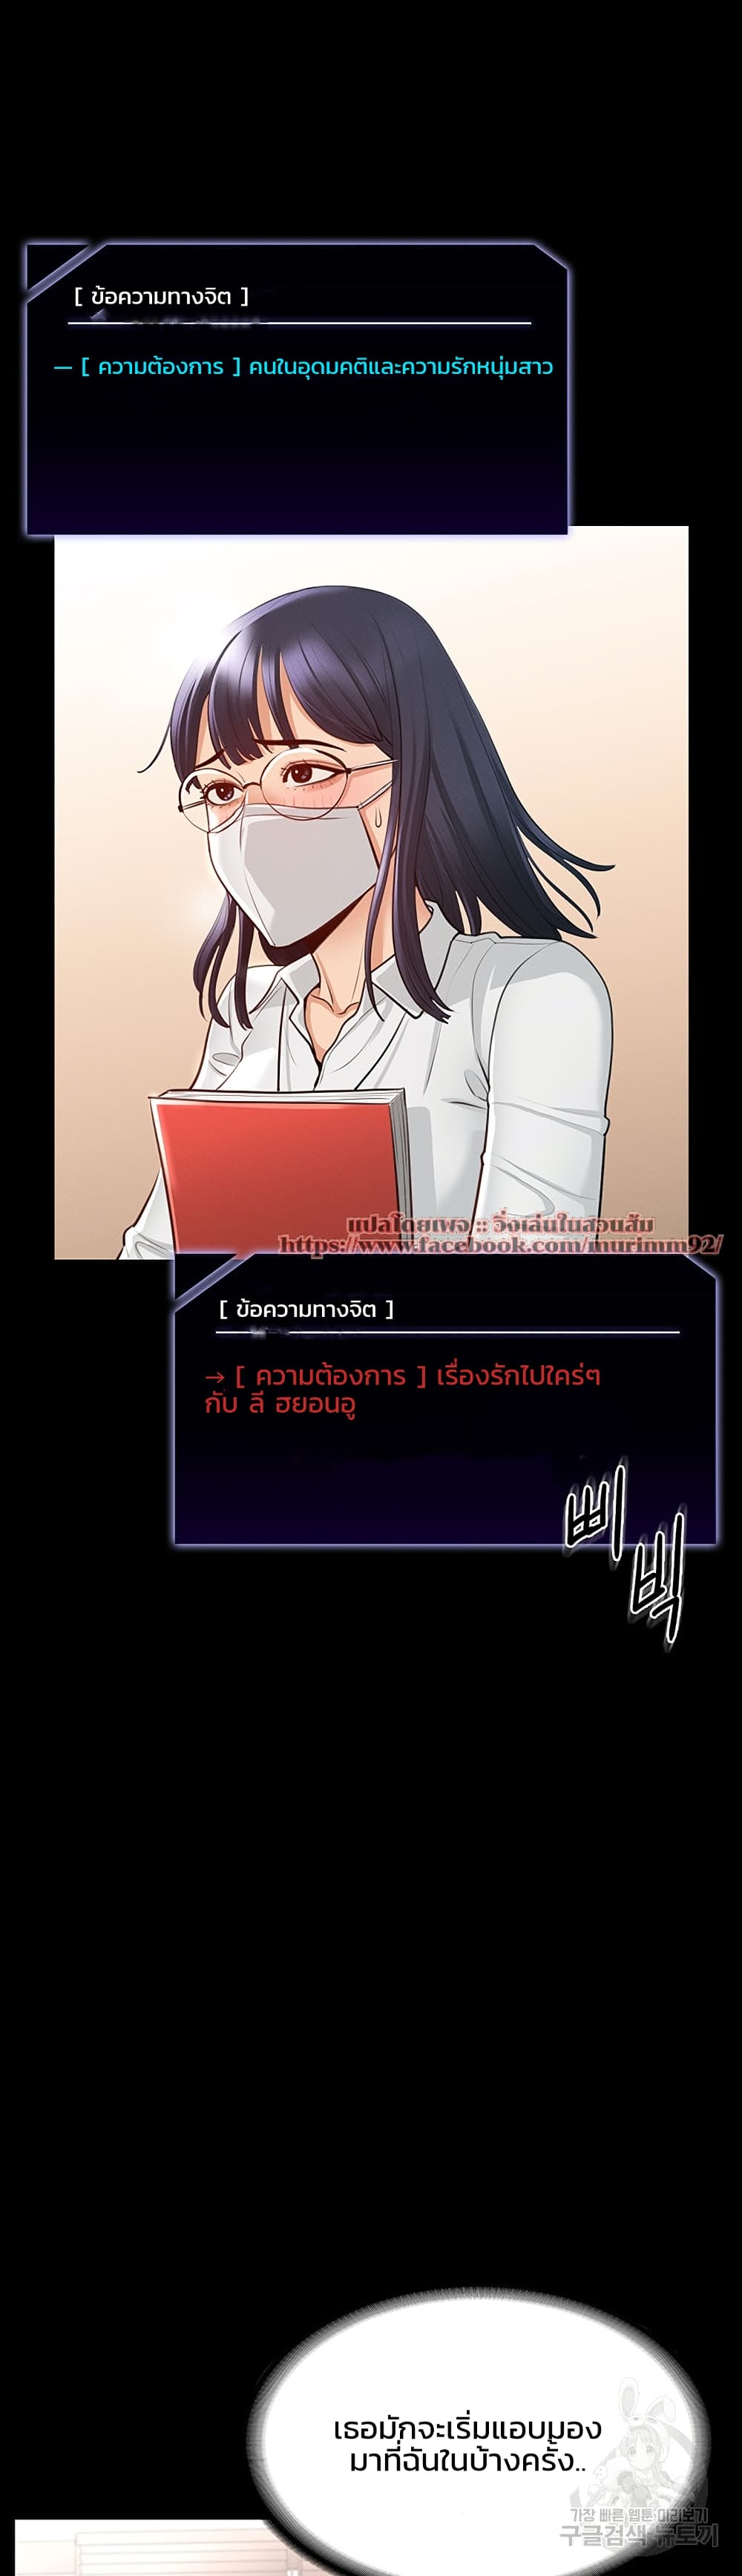 Workplace Manager Privileges ตอนที่ 2 ภาพ 39